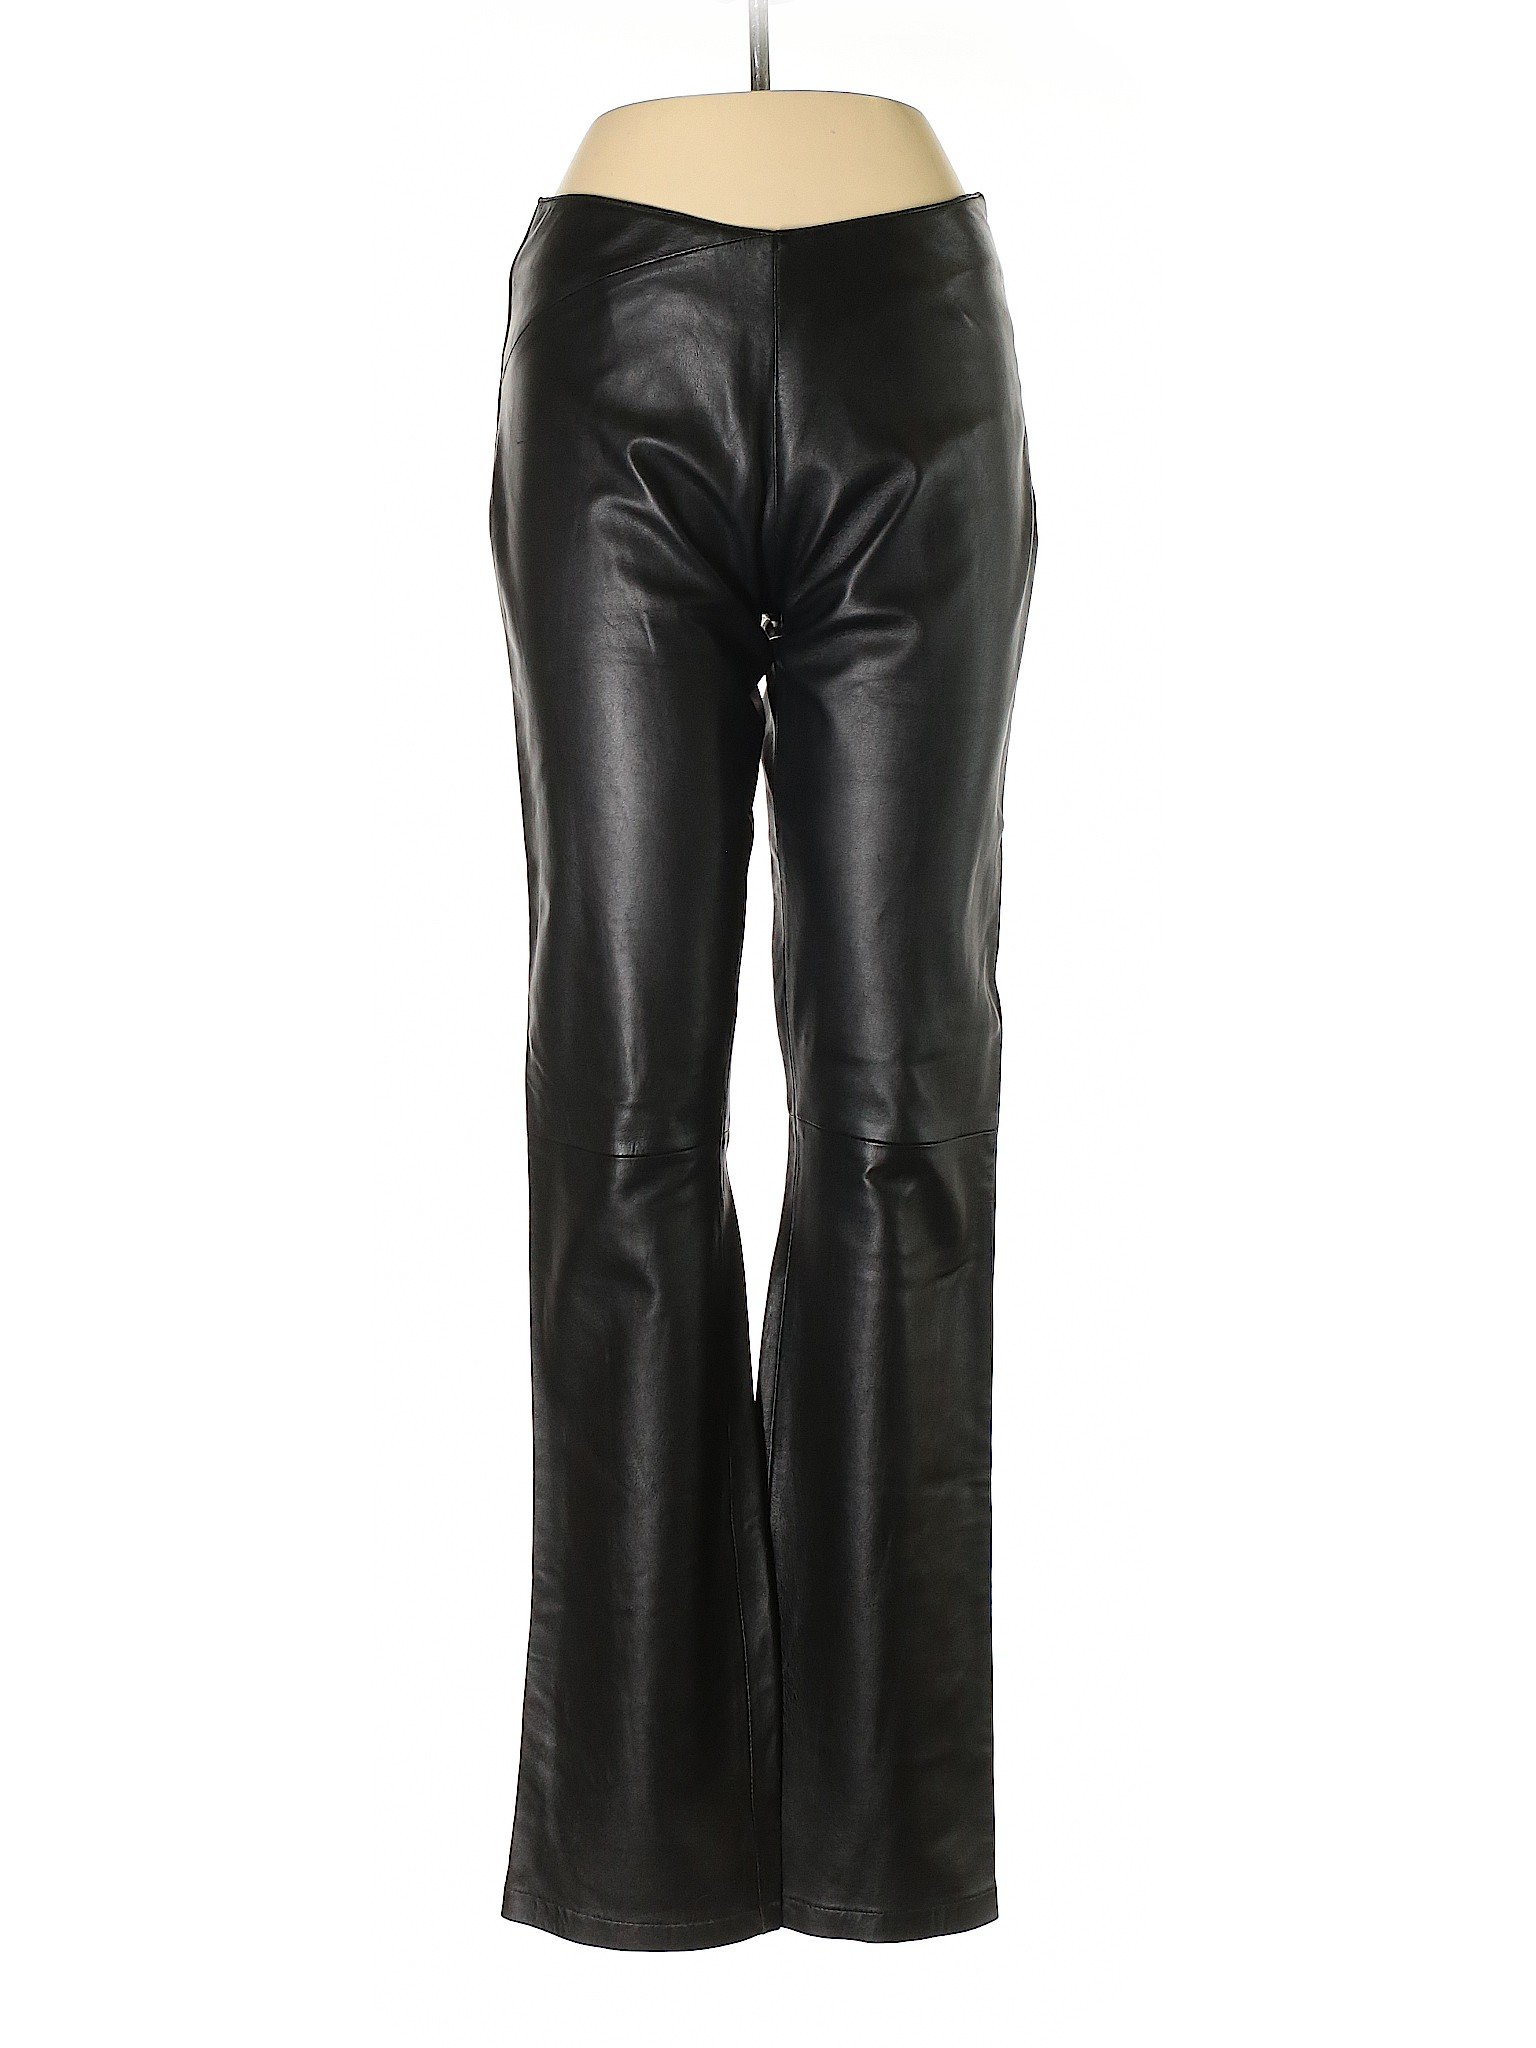 Paolo Santini 100% Leather Black Leather Pants Size 10 - 58% off | thredUP